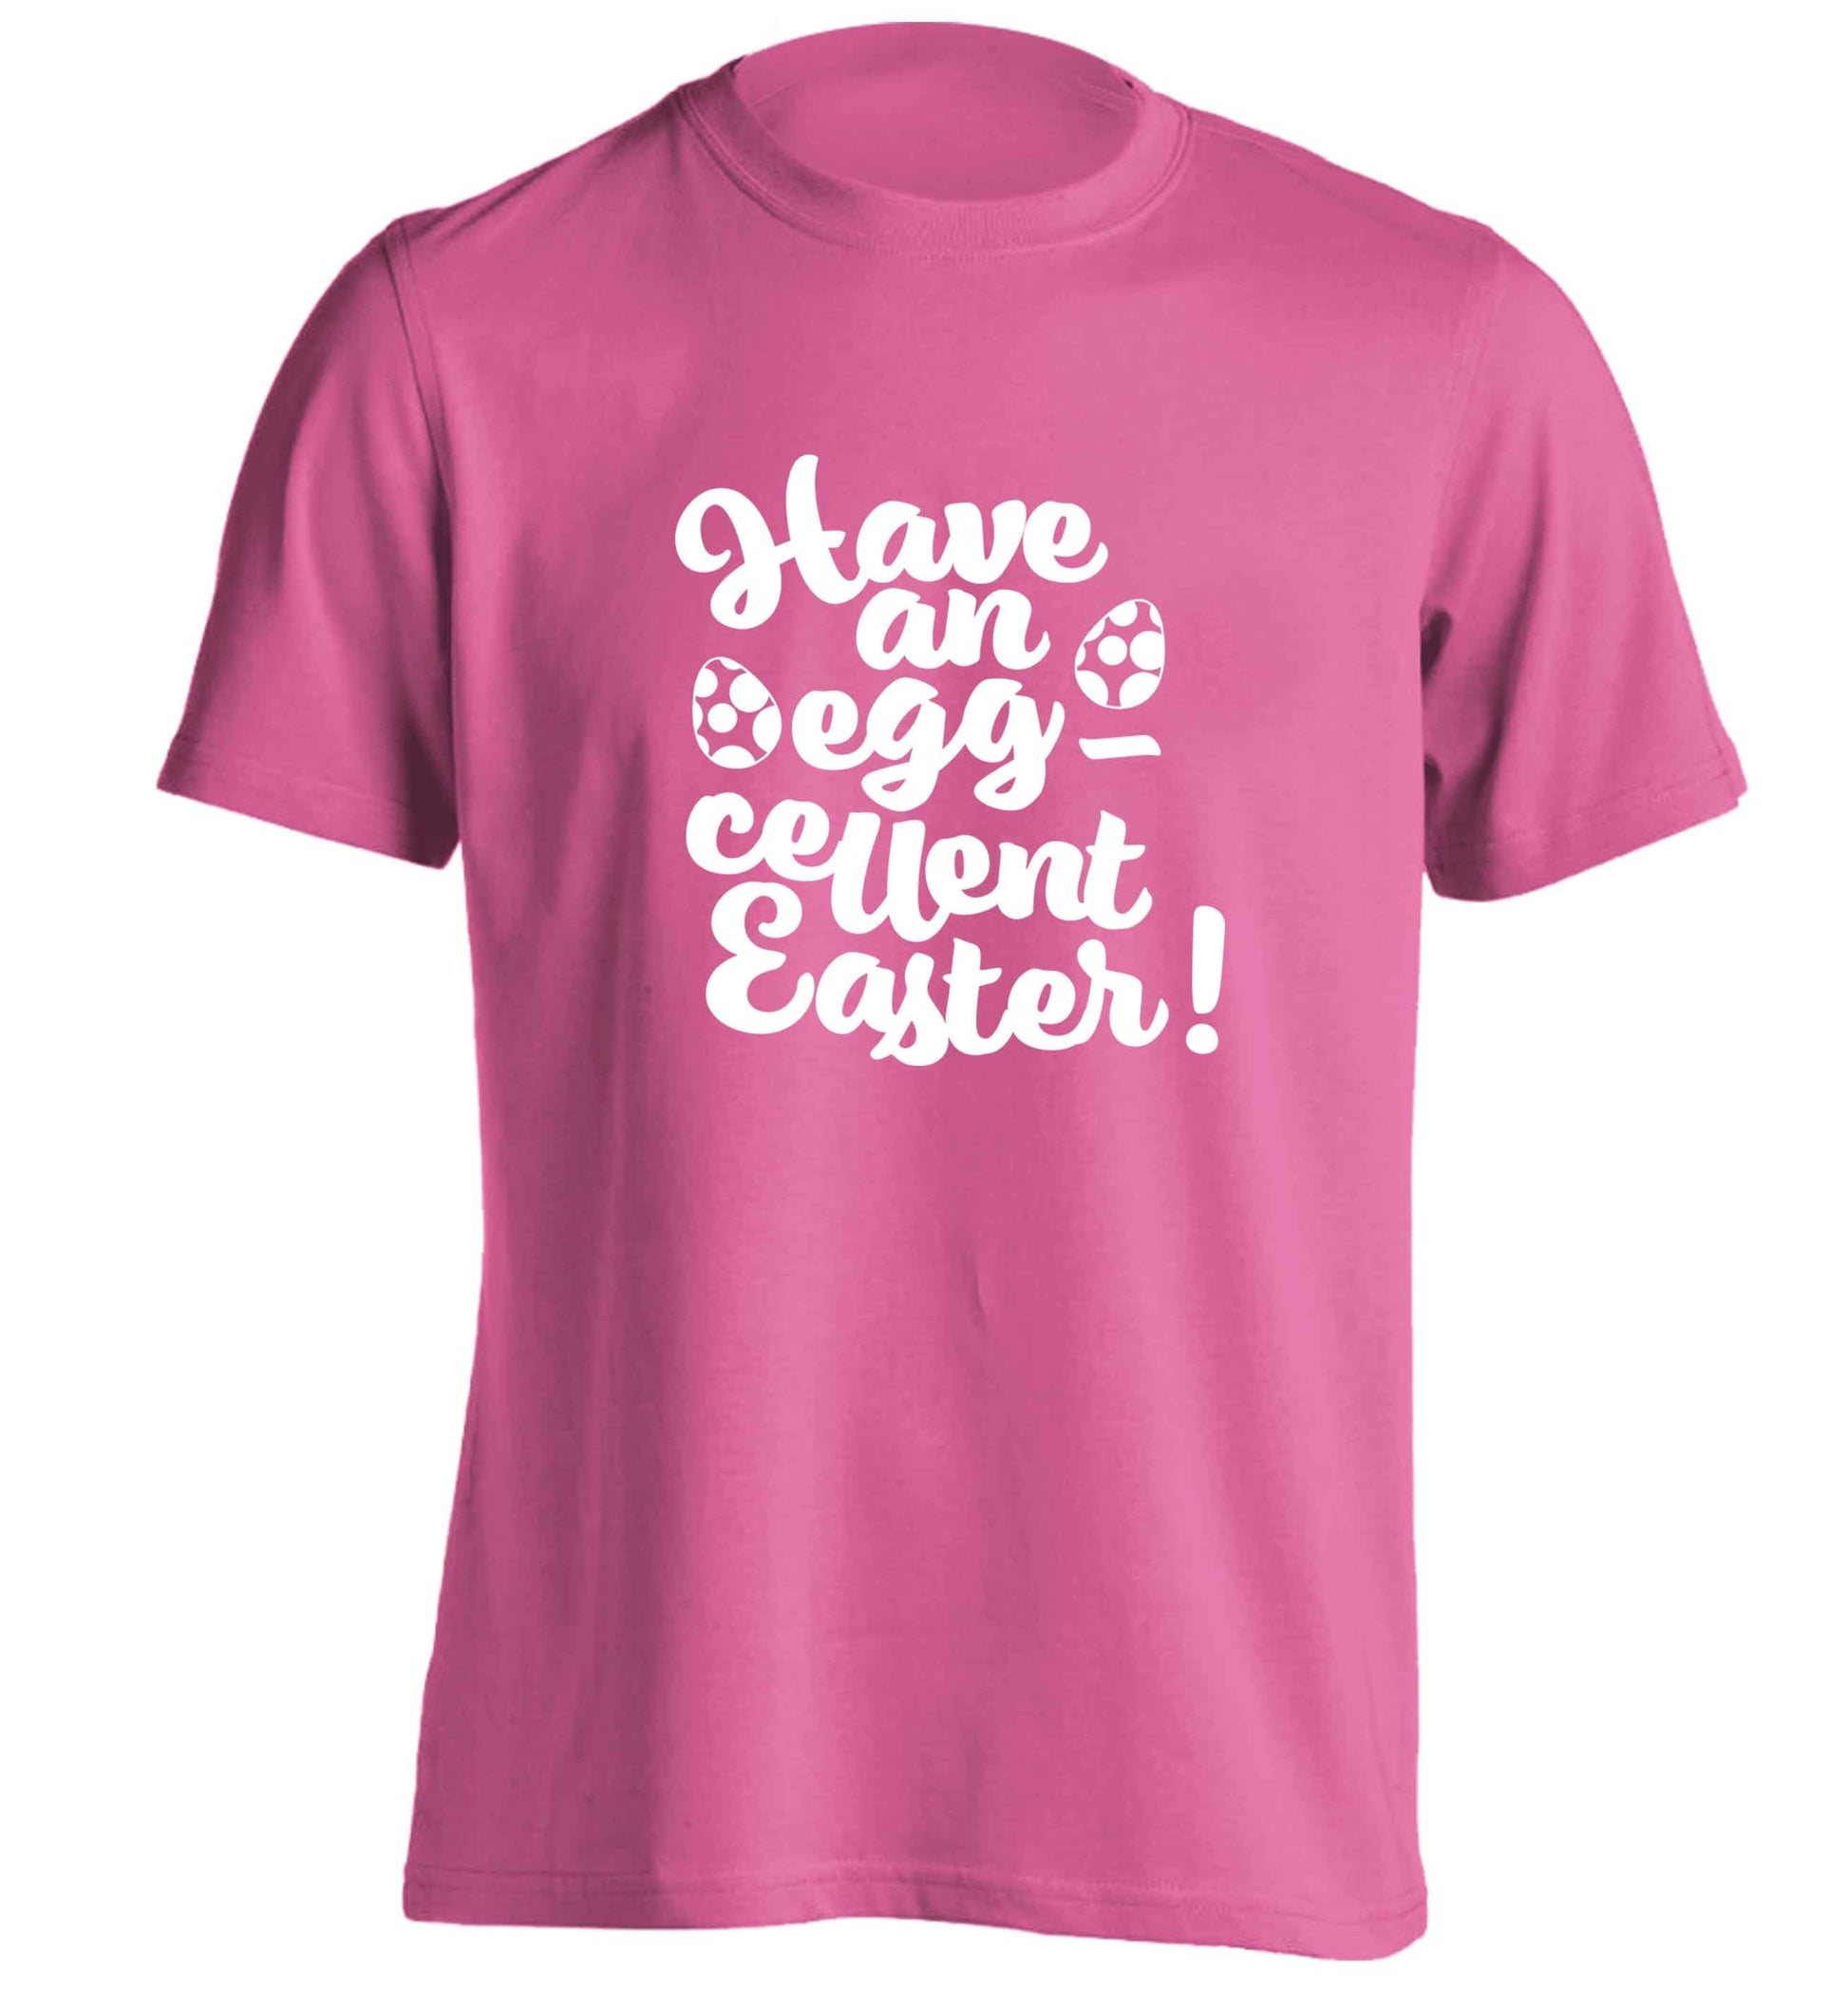 Have an eggcellent Easter adults unisex pink Tshirt 2XL